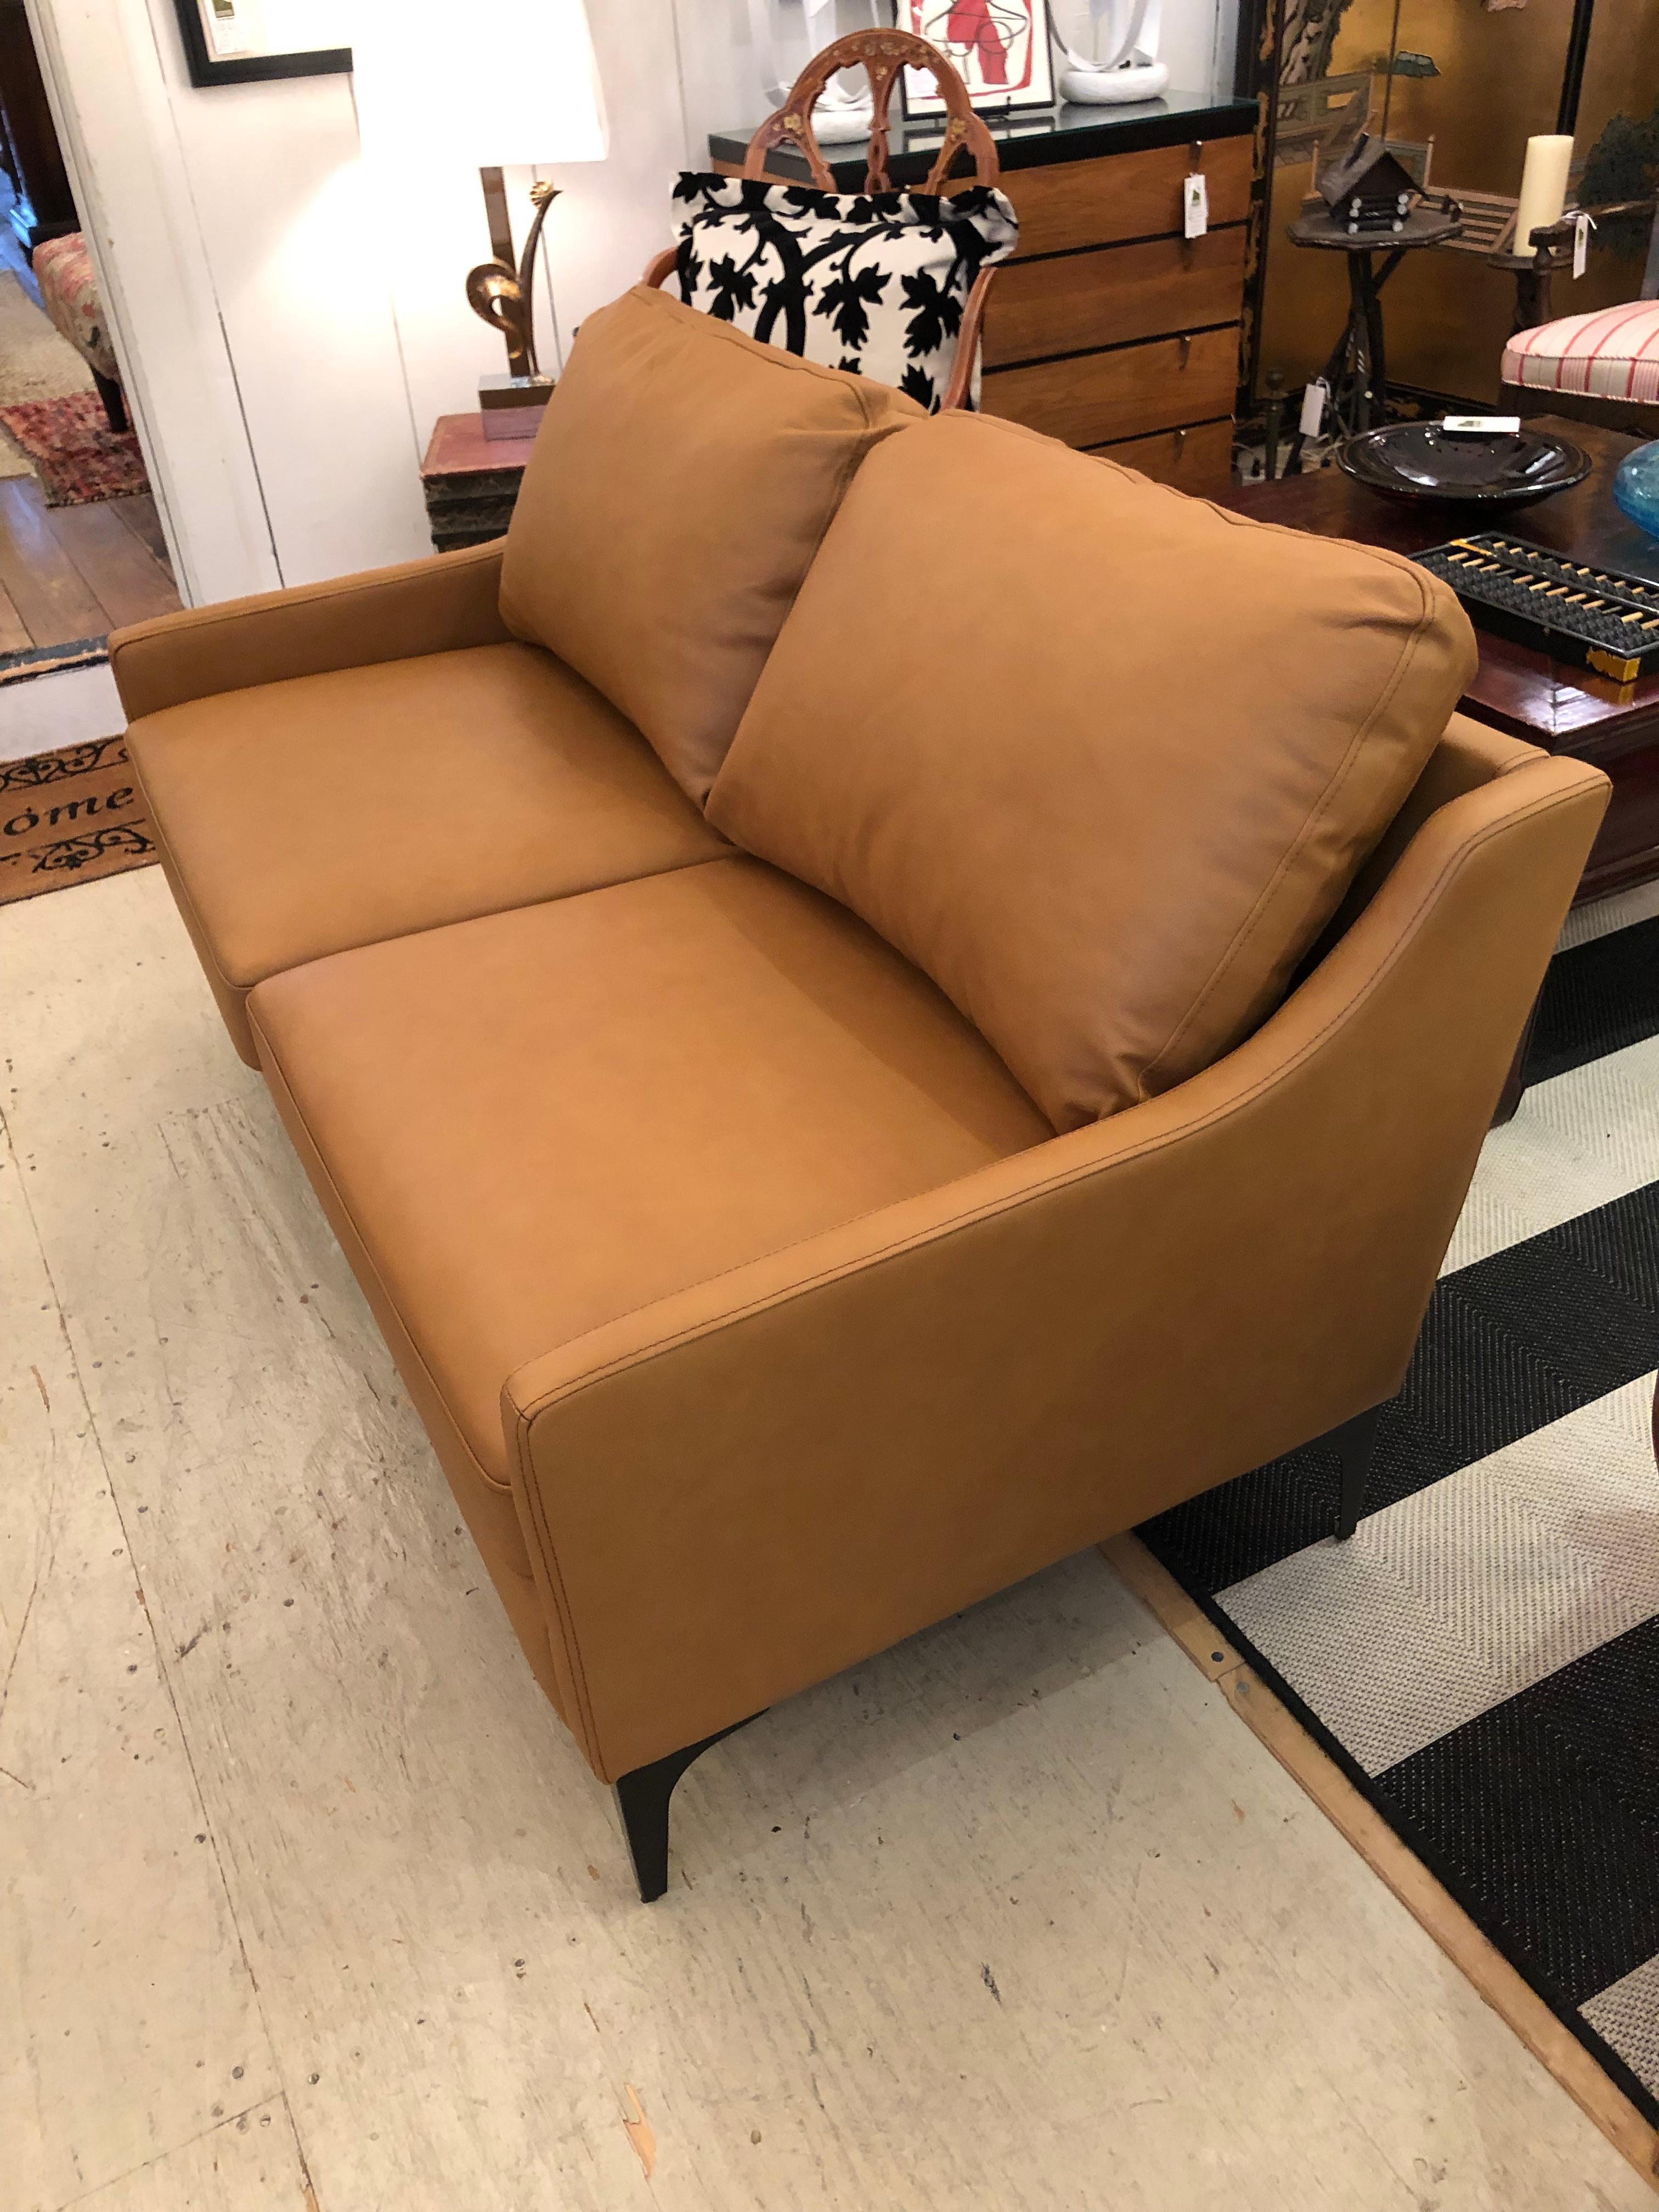 Supple and smooth contemporary leather sofa loveseat having caramel color and two removeable seat cushions as well as two back cushions. The seats cushions have velcro to keep them from slipping. Tailored mahogany legs complete the sleek